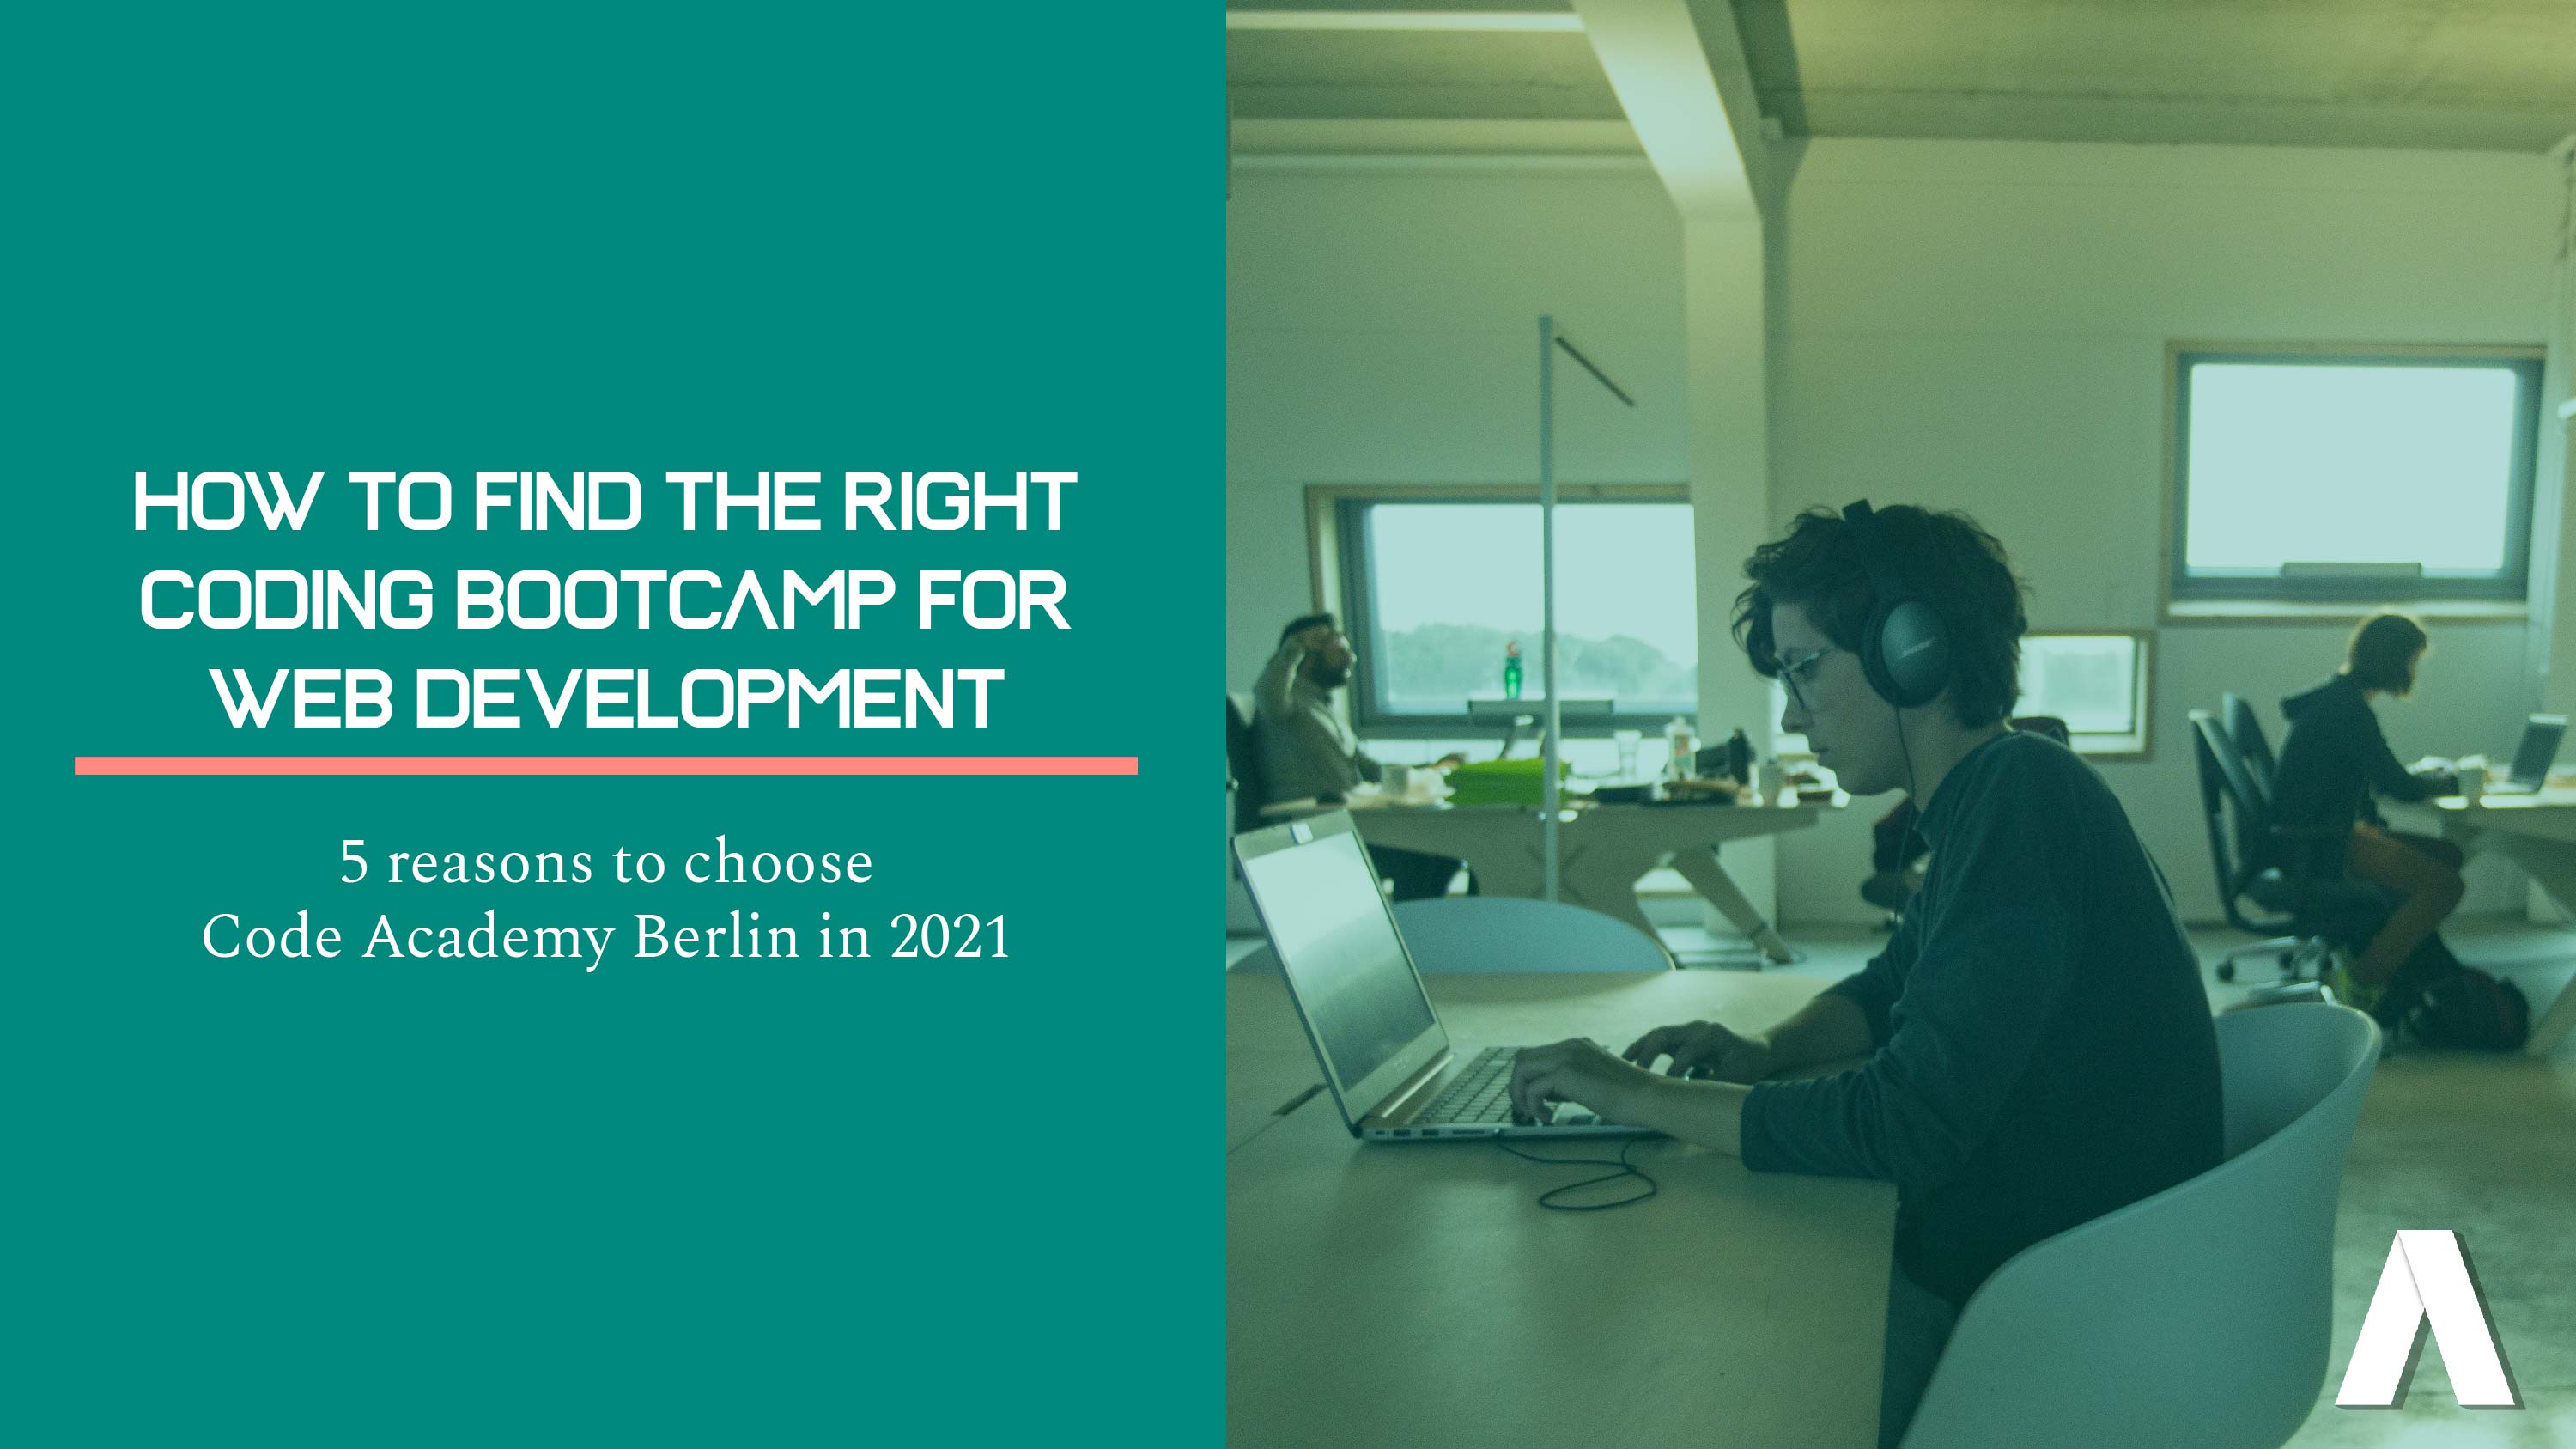 5 reasons to choose Code Academy Berlin to become a Web Developer in 2021